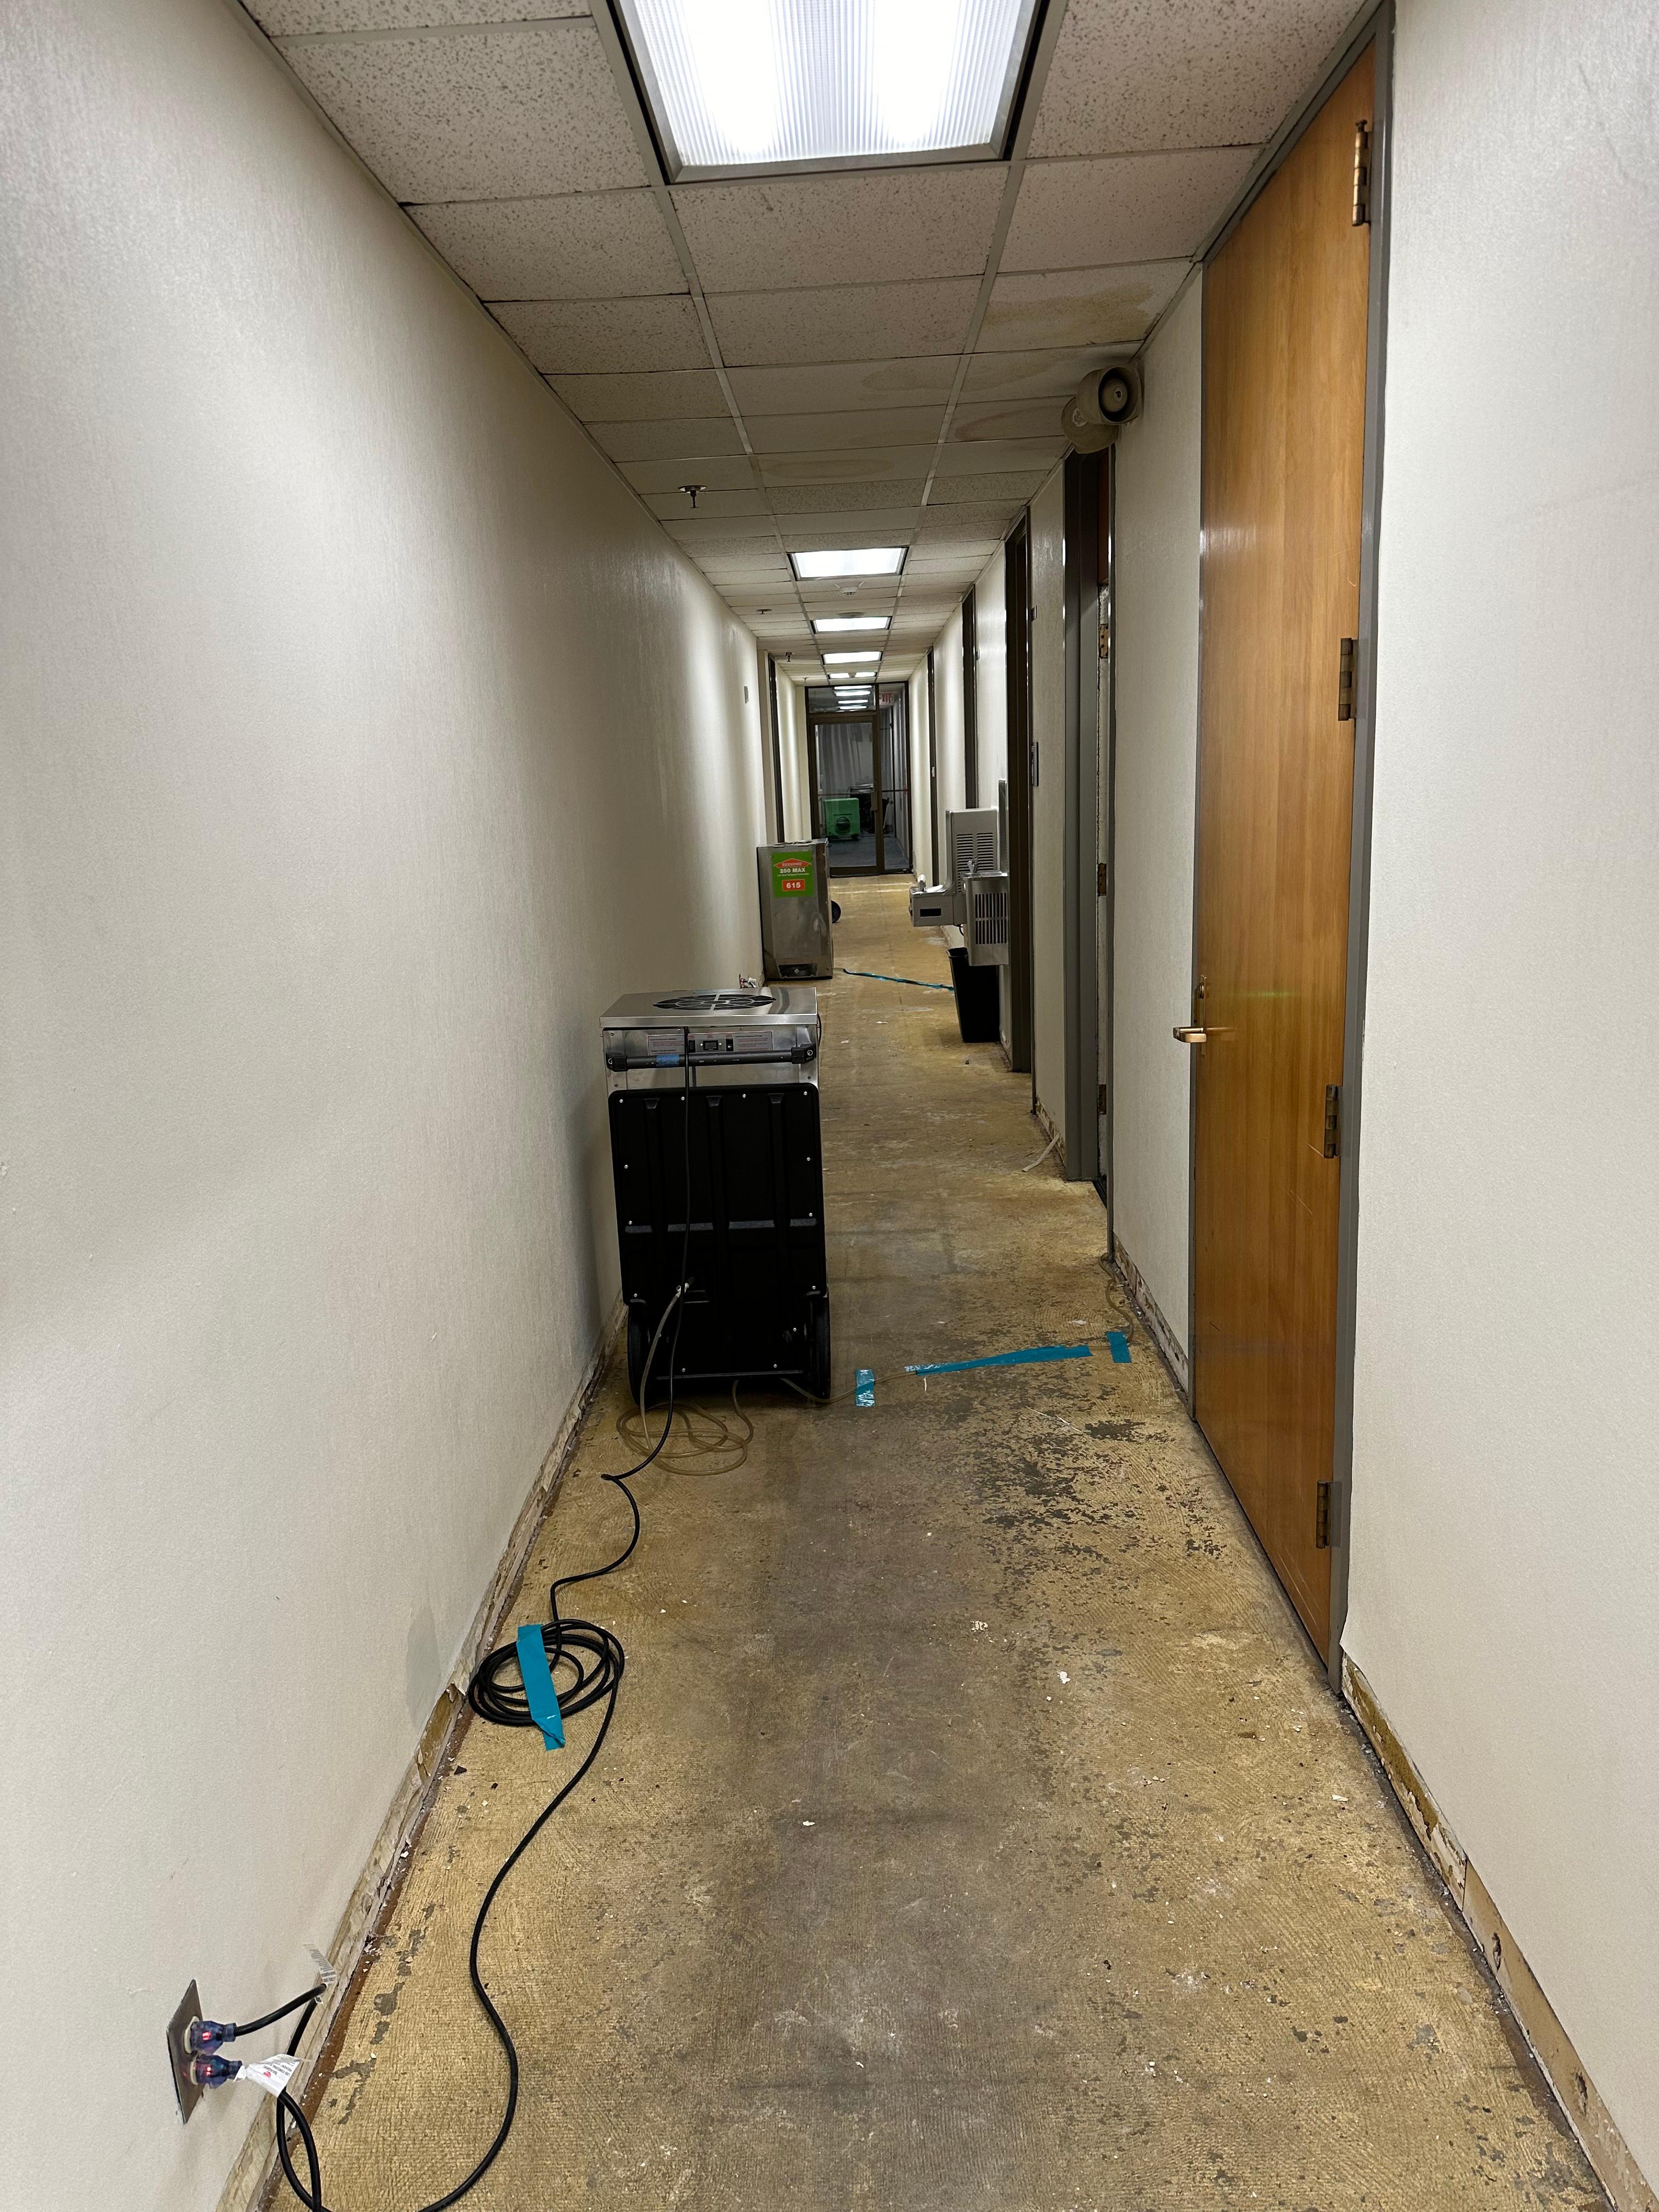 SERVPRO air dryers deployed down the hallway after flooring has been removed.